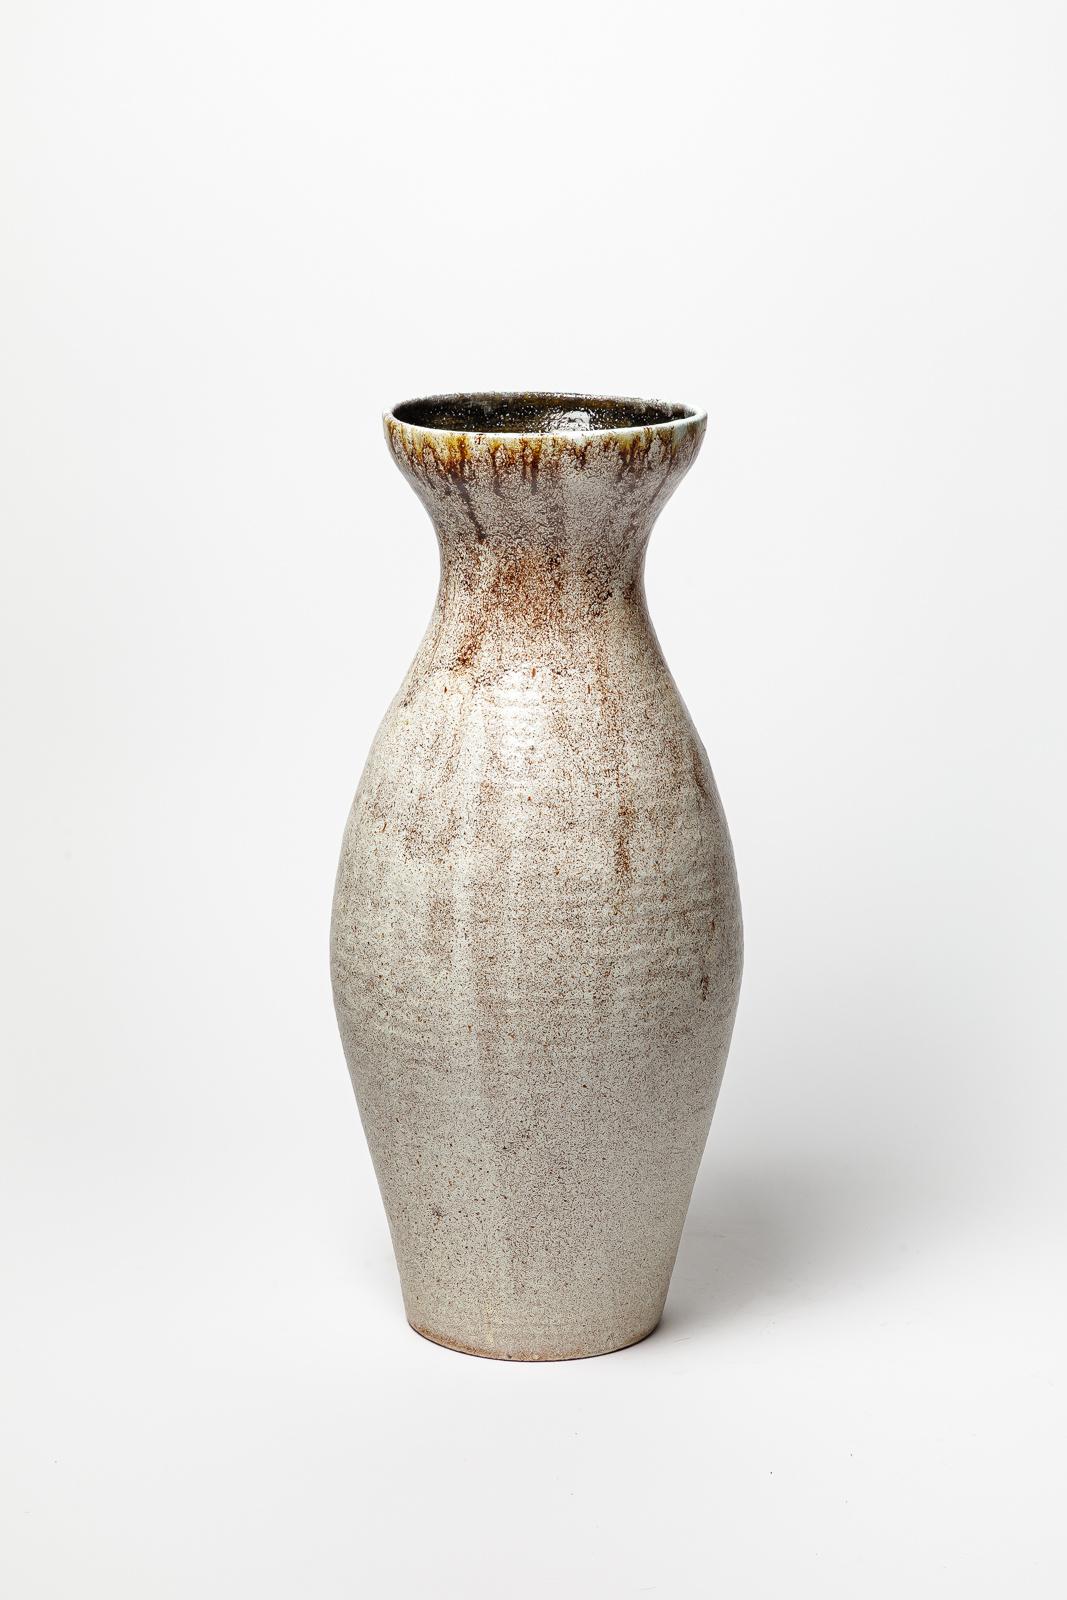 White glazed stoneware vase by Accolay.
Artist signature under the base. Circa 1960-1970. 
H : 18.9’ x 7.1’ inches.